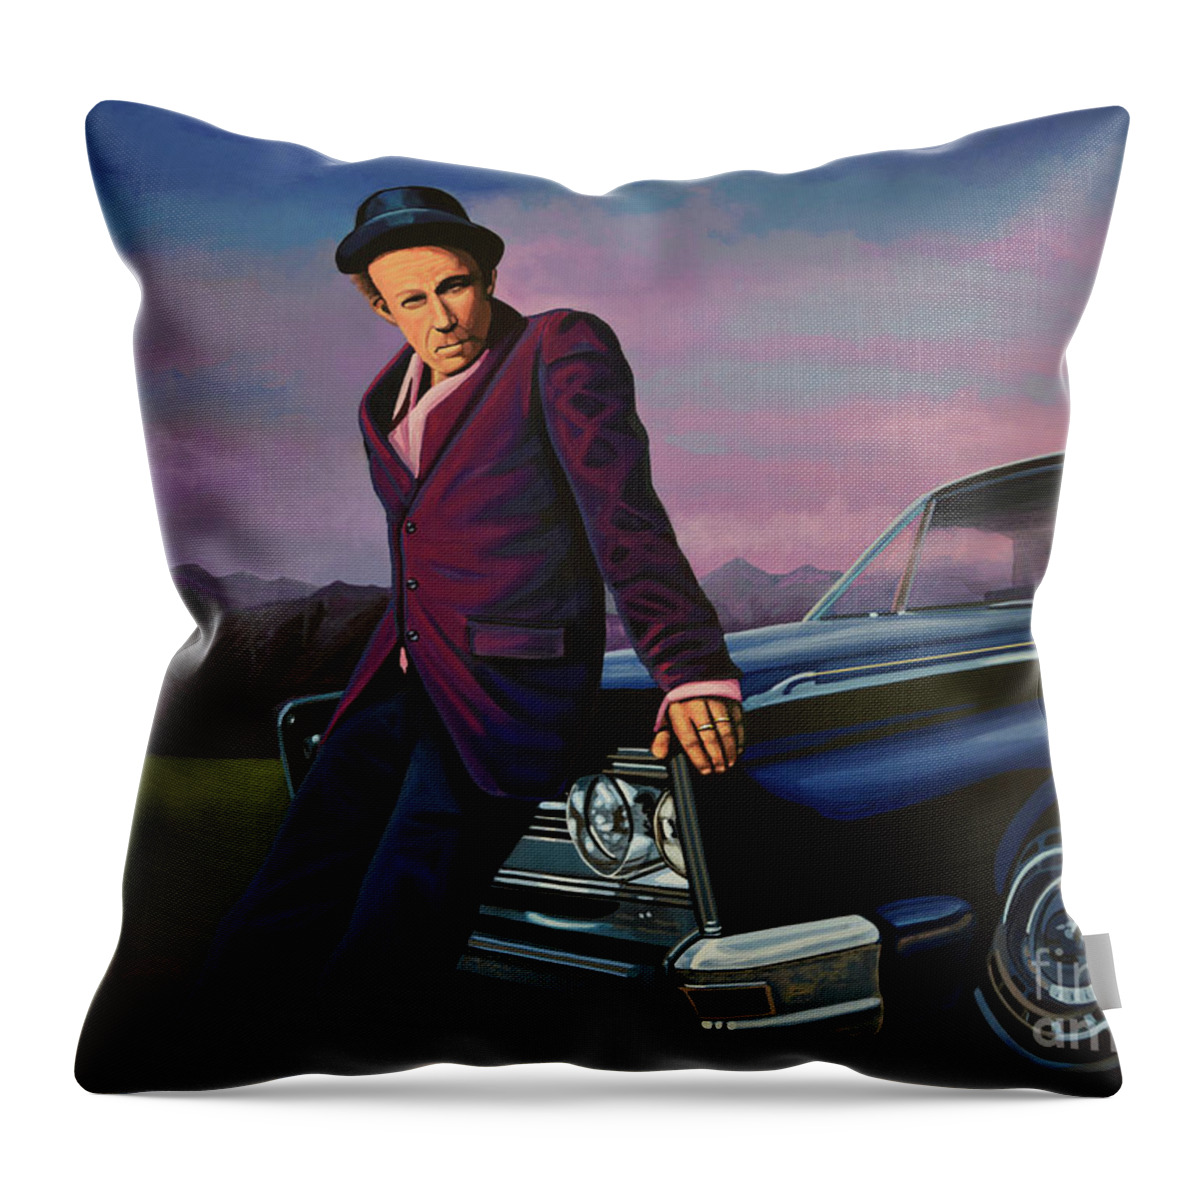 Tom Waits Throw Pillow featuring the painting Tom Waits by Paul Meijering